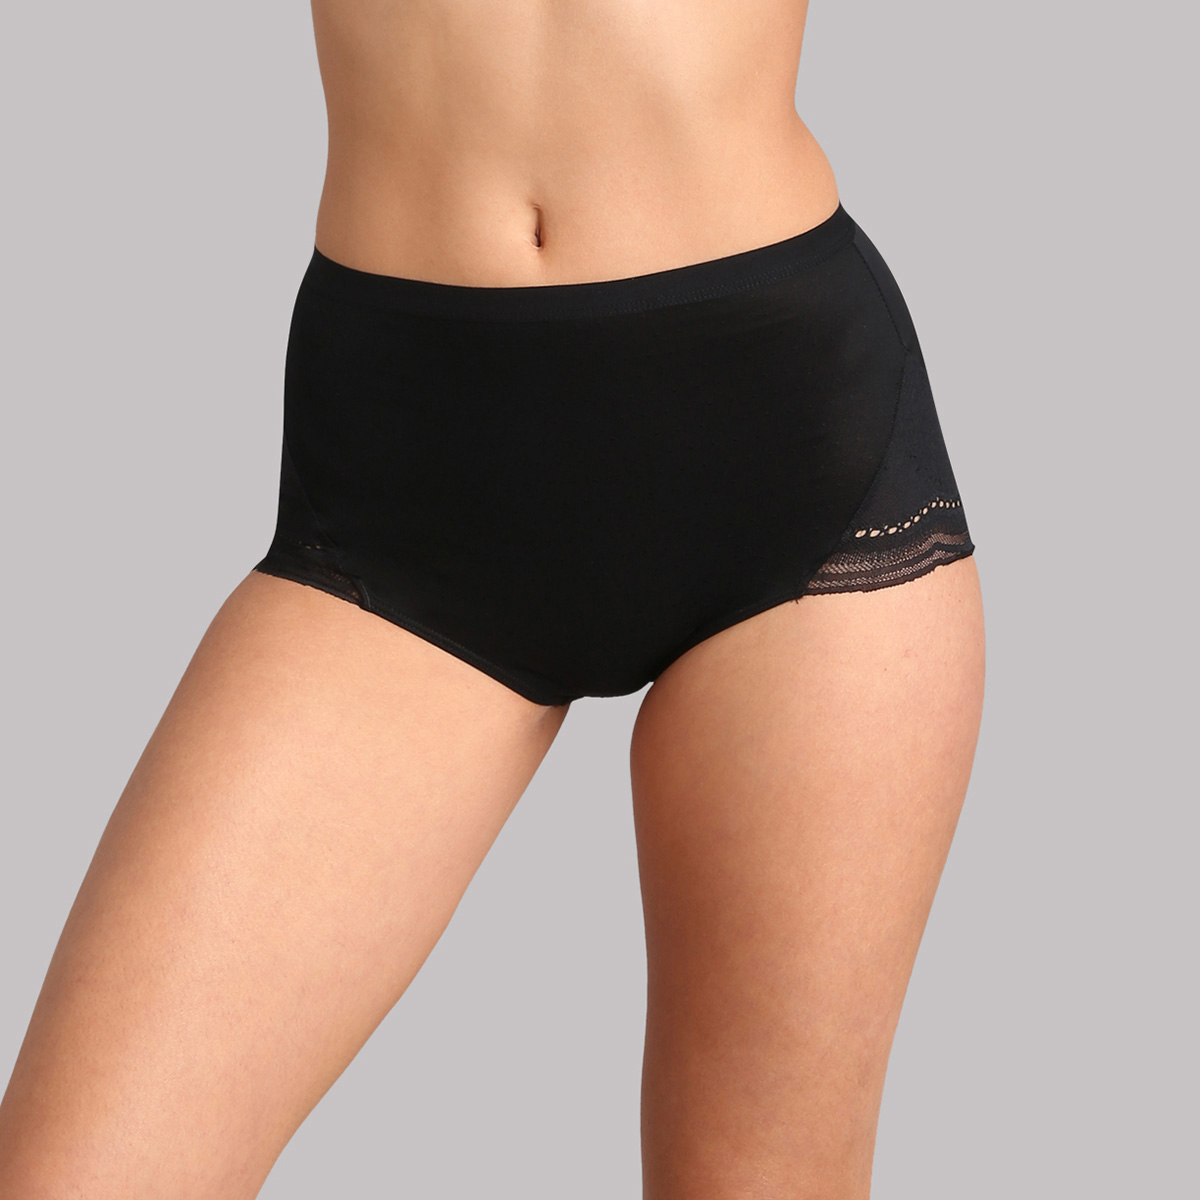 High rise knickers in black lace - Secret Comfort, , PLAYTEX